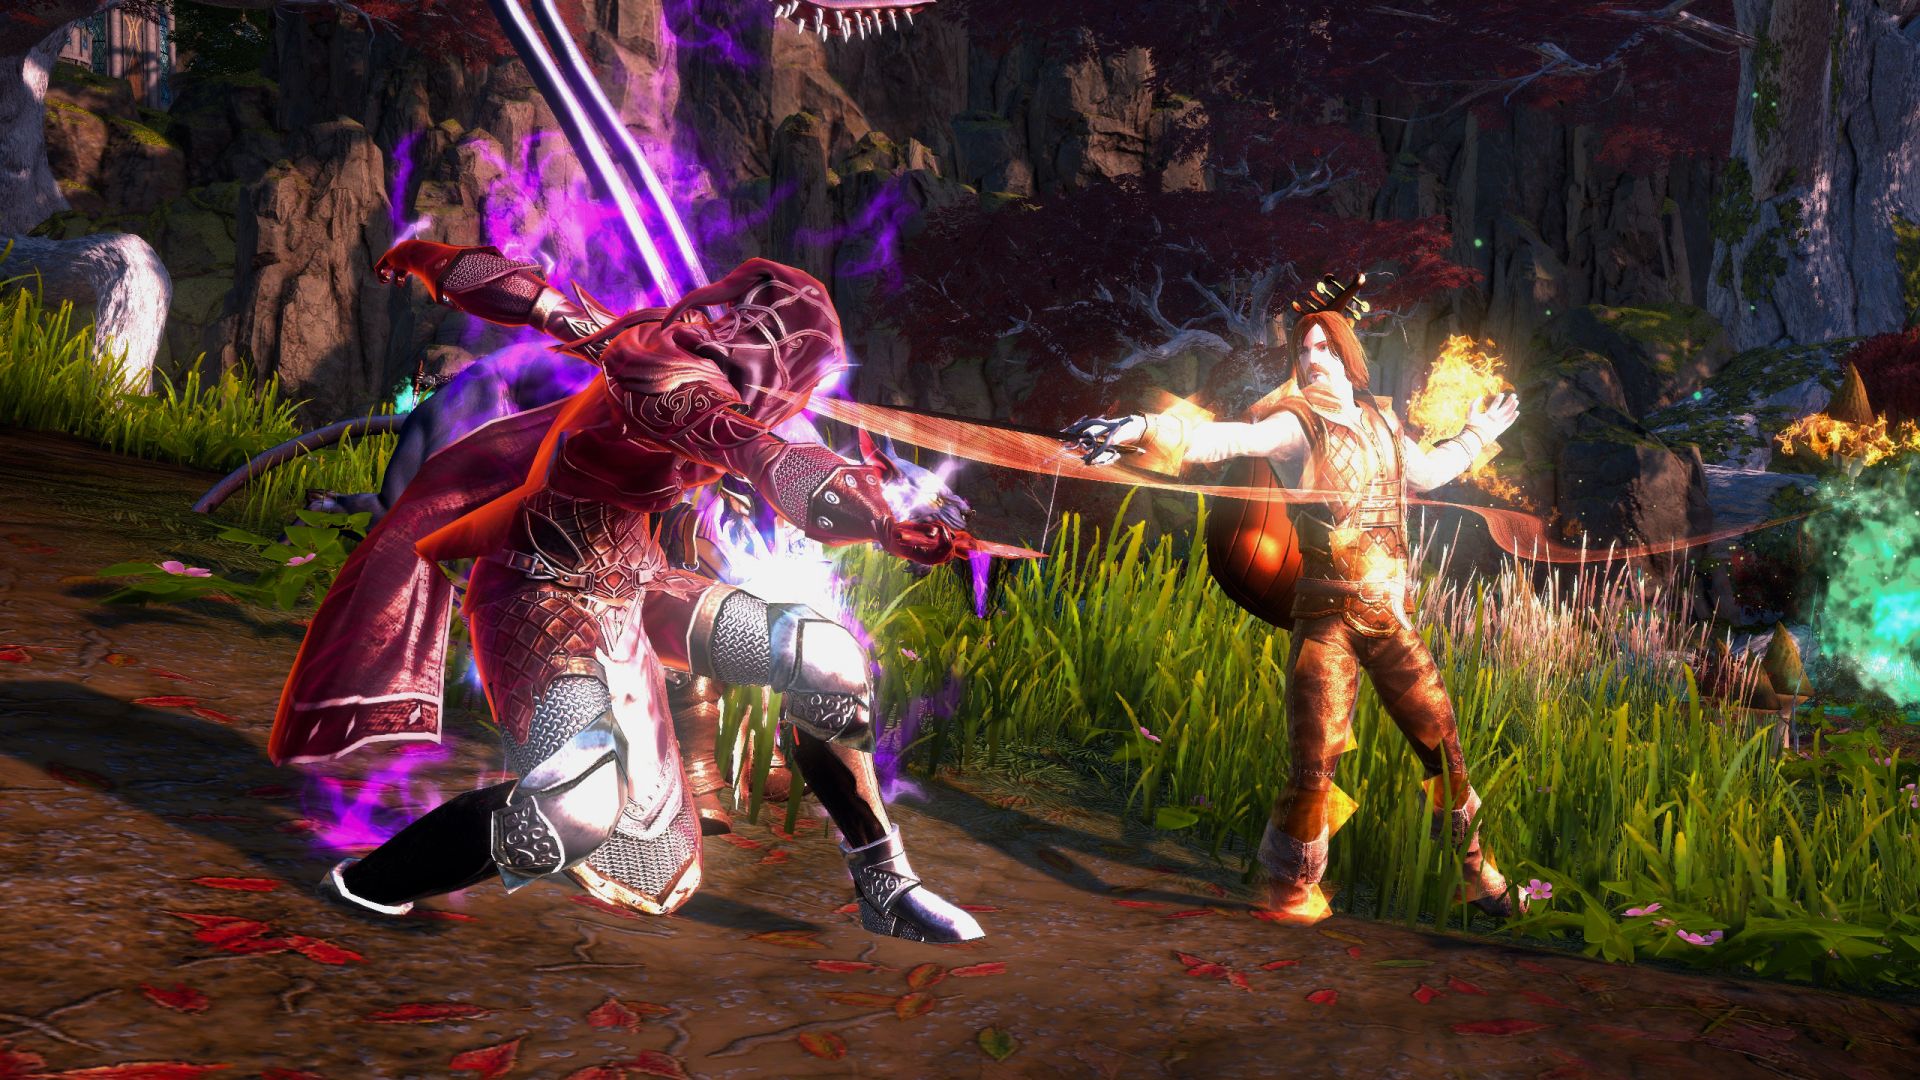 Neverwinter: Jewel of the North brings the MMO closer to its DnD inspiration